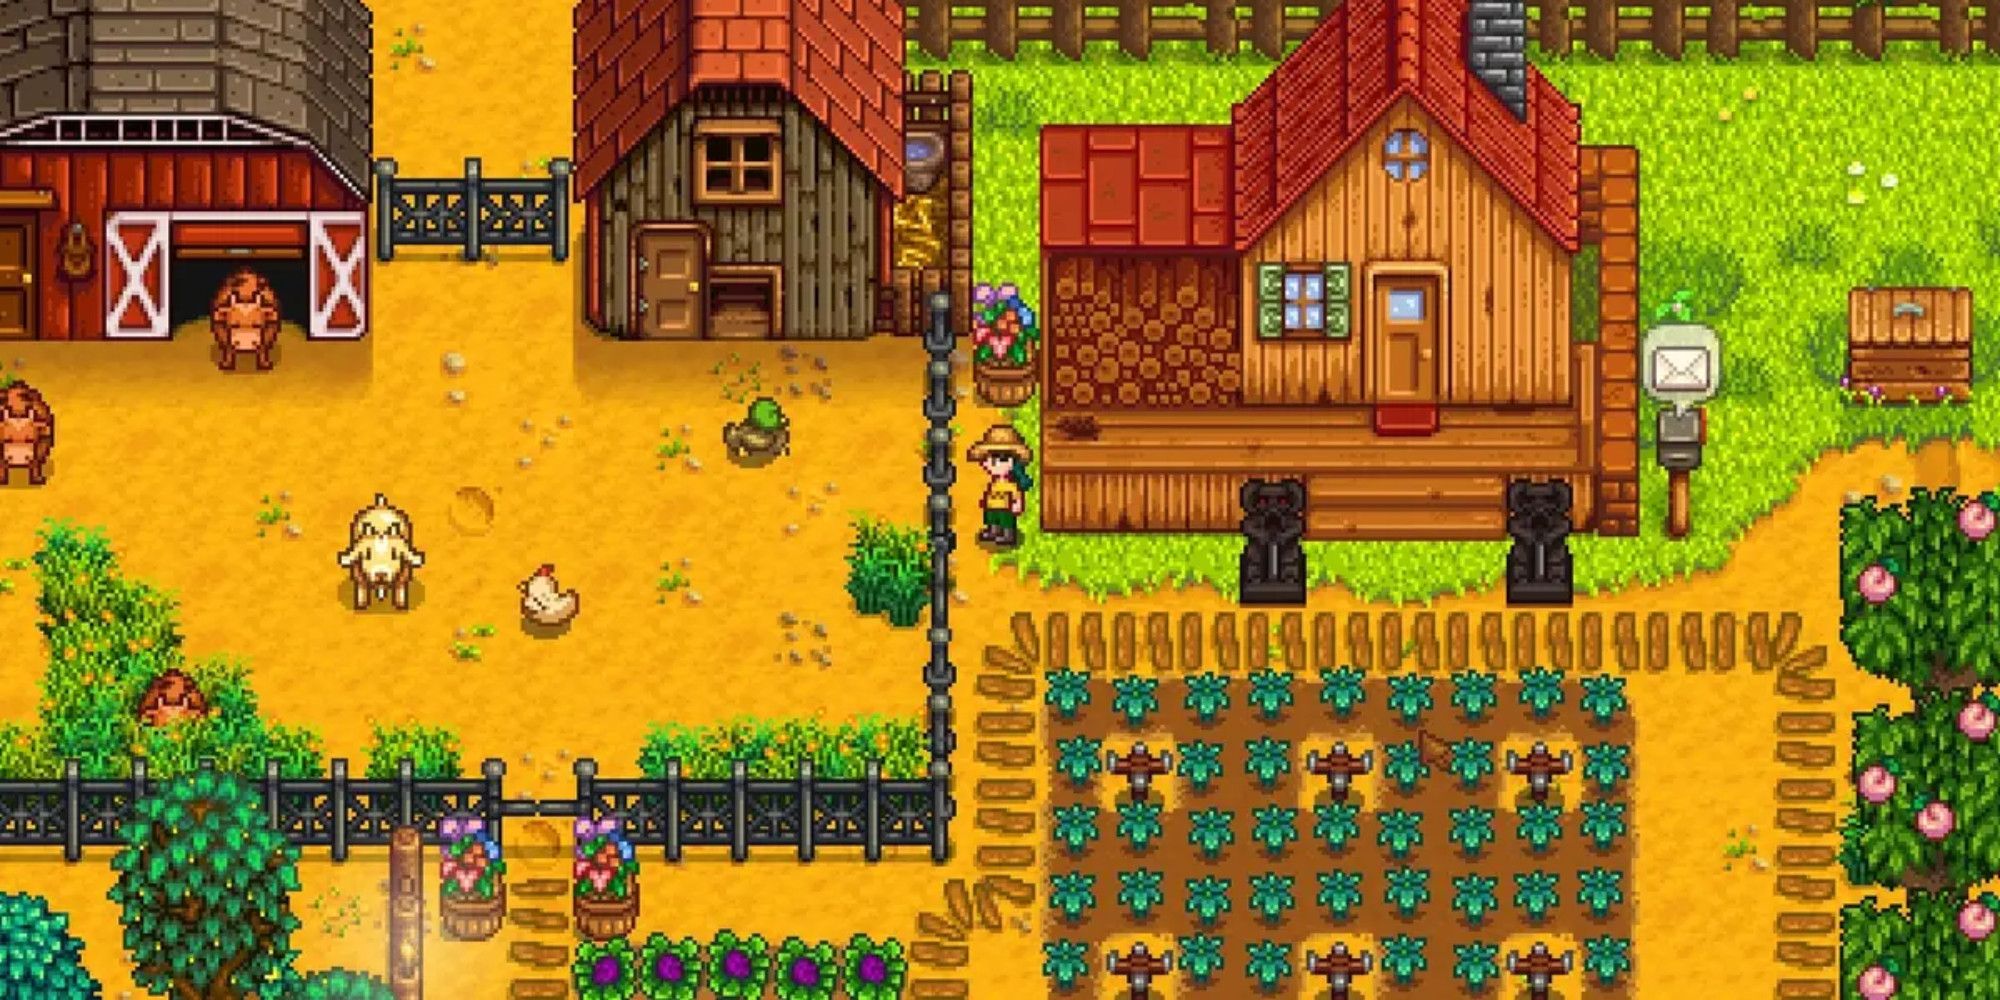 A farm in Stardew Valley full of cows, plants and trees